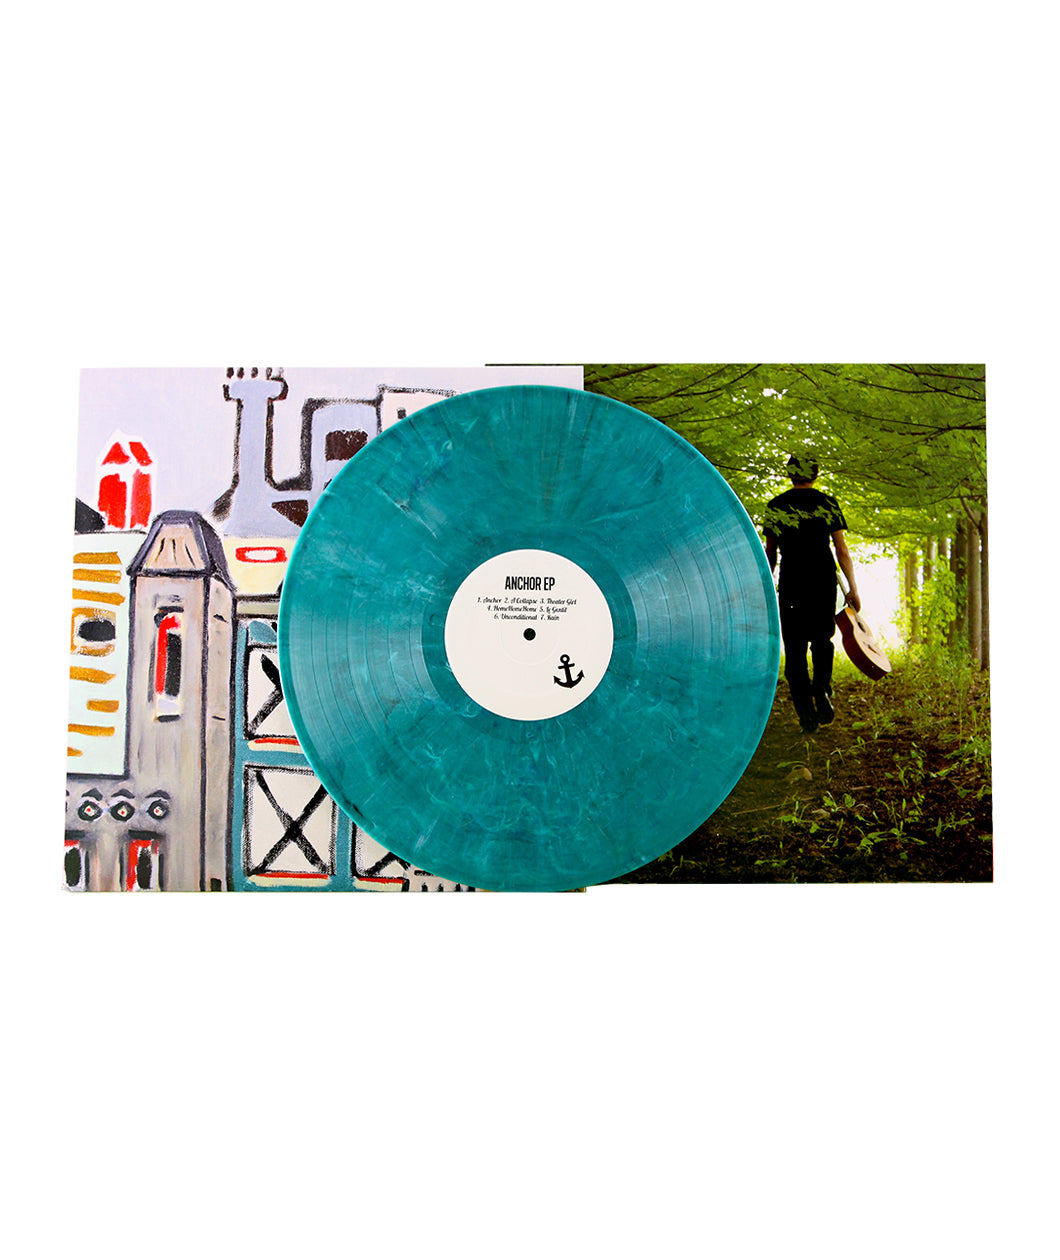 A teal vinyl in the middle reading 